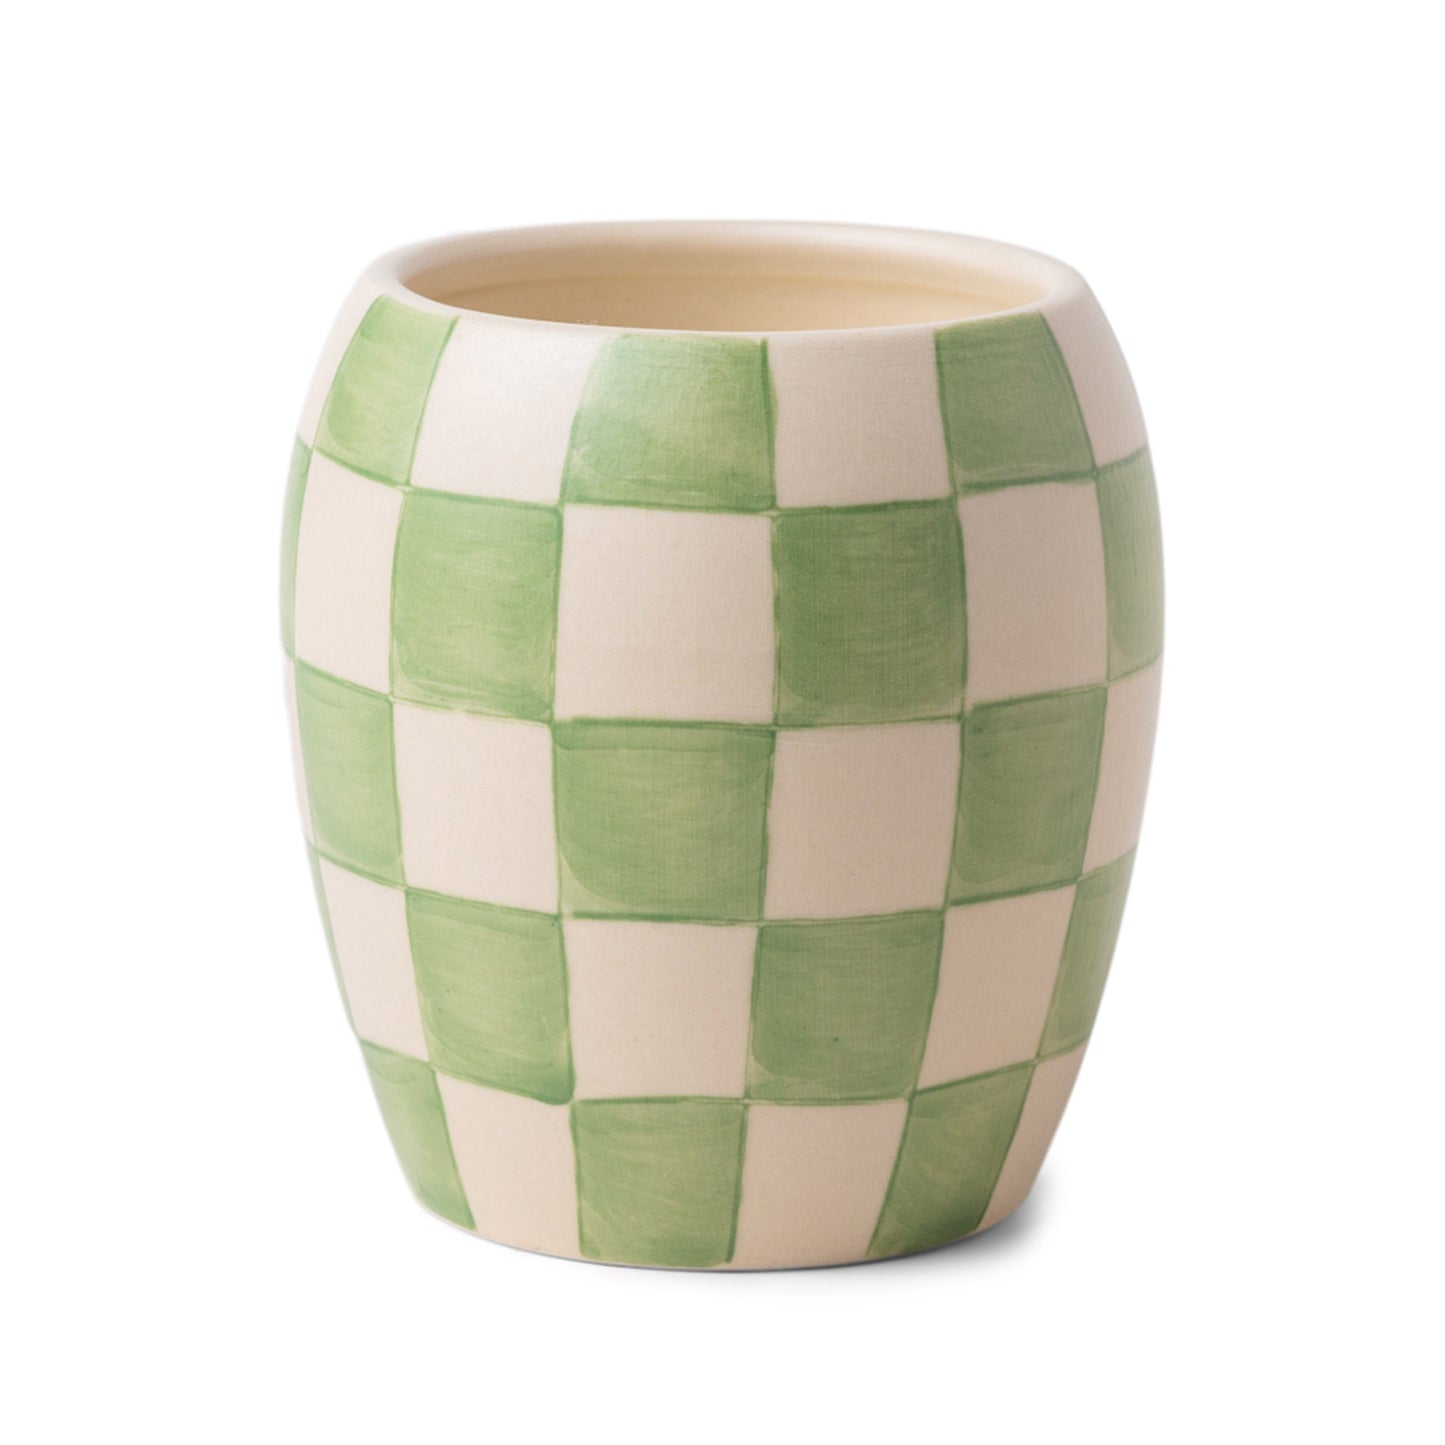 11 oz ceramic vessel with rounded cylindrical shape and a light green and white checker design; one cotton wick